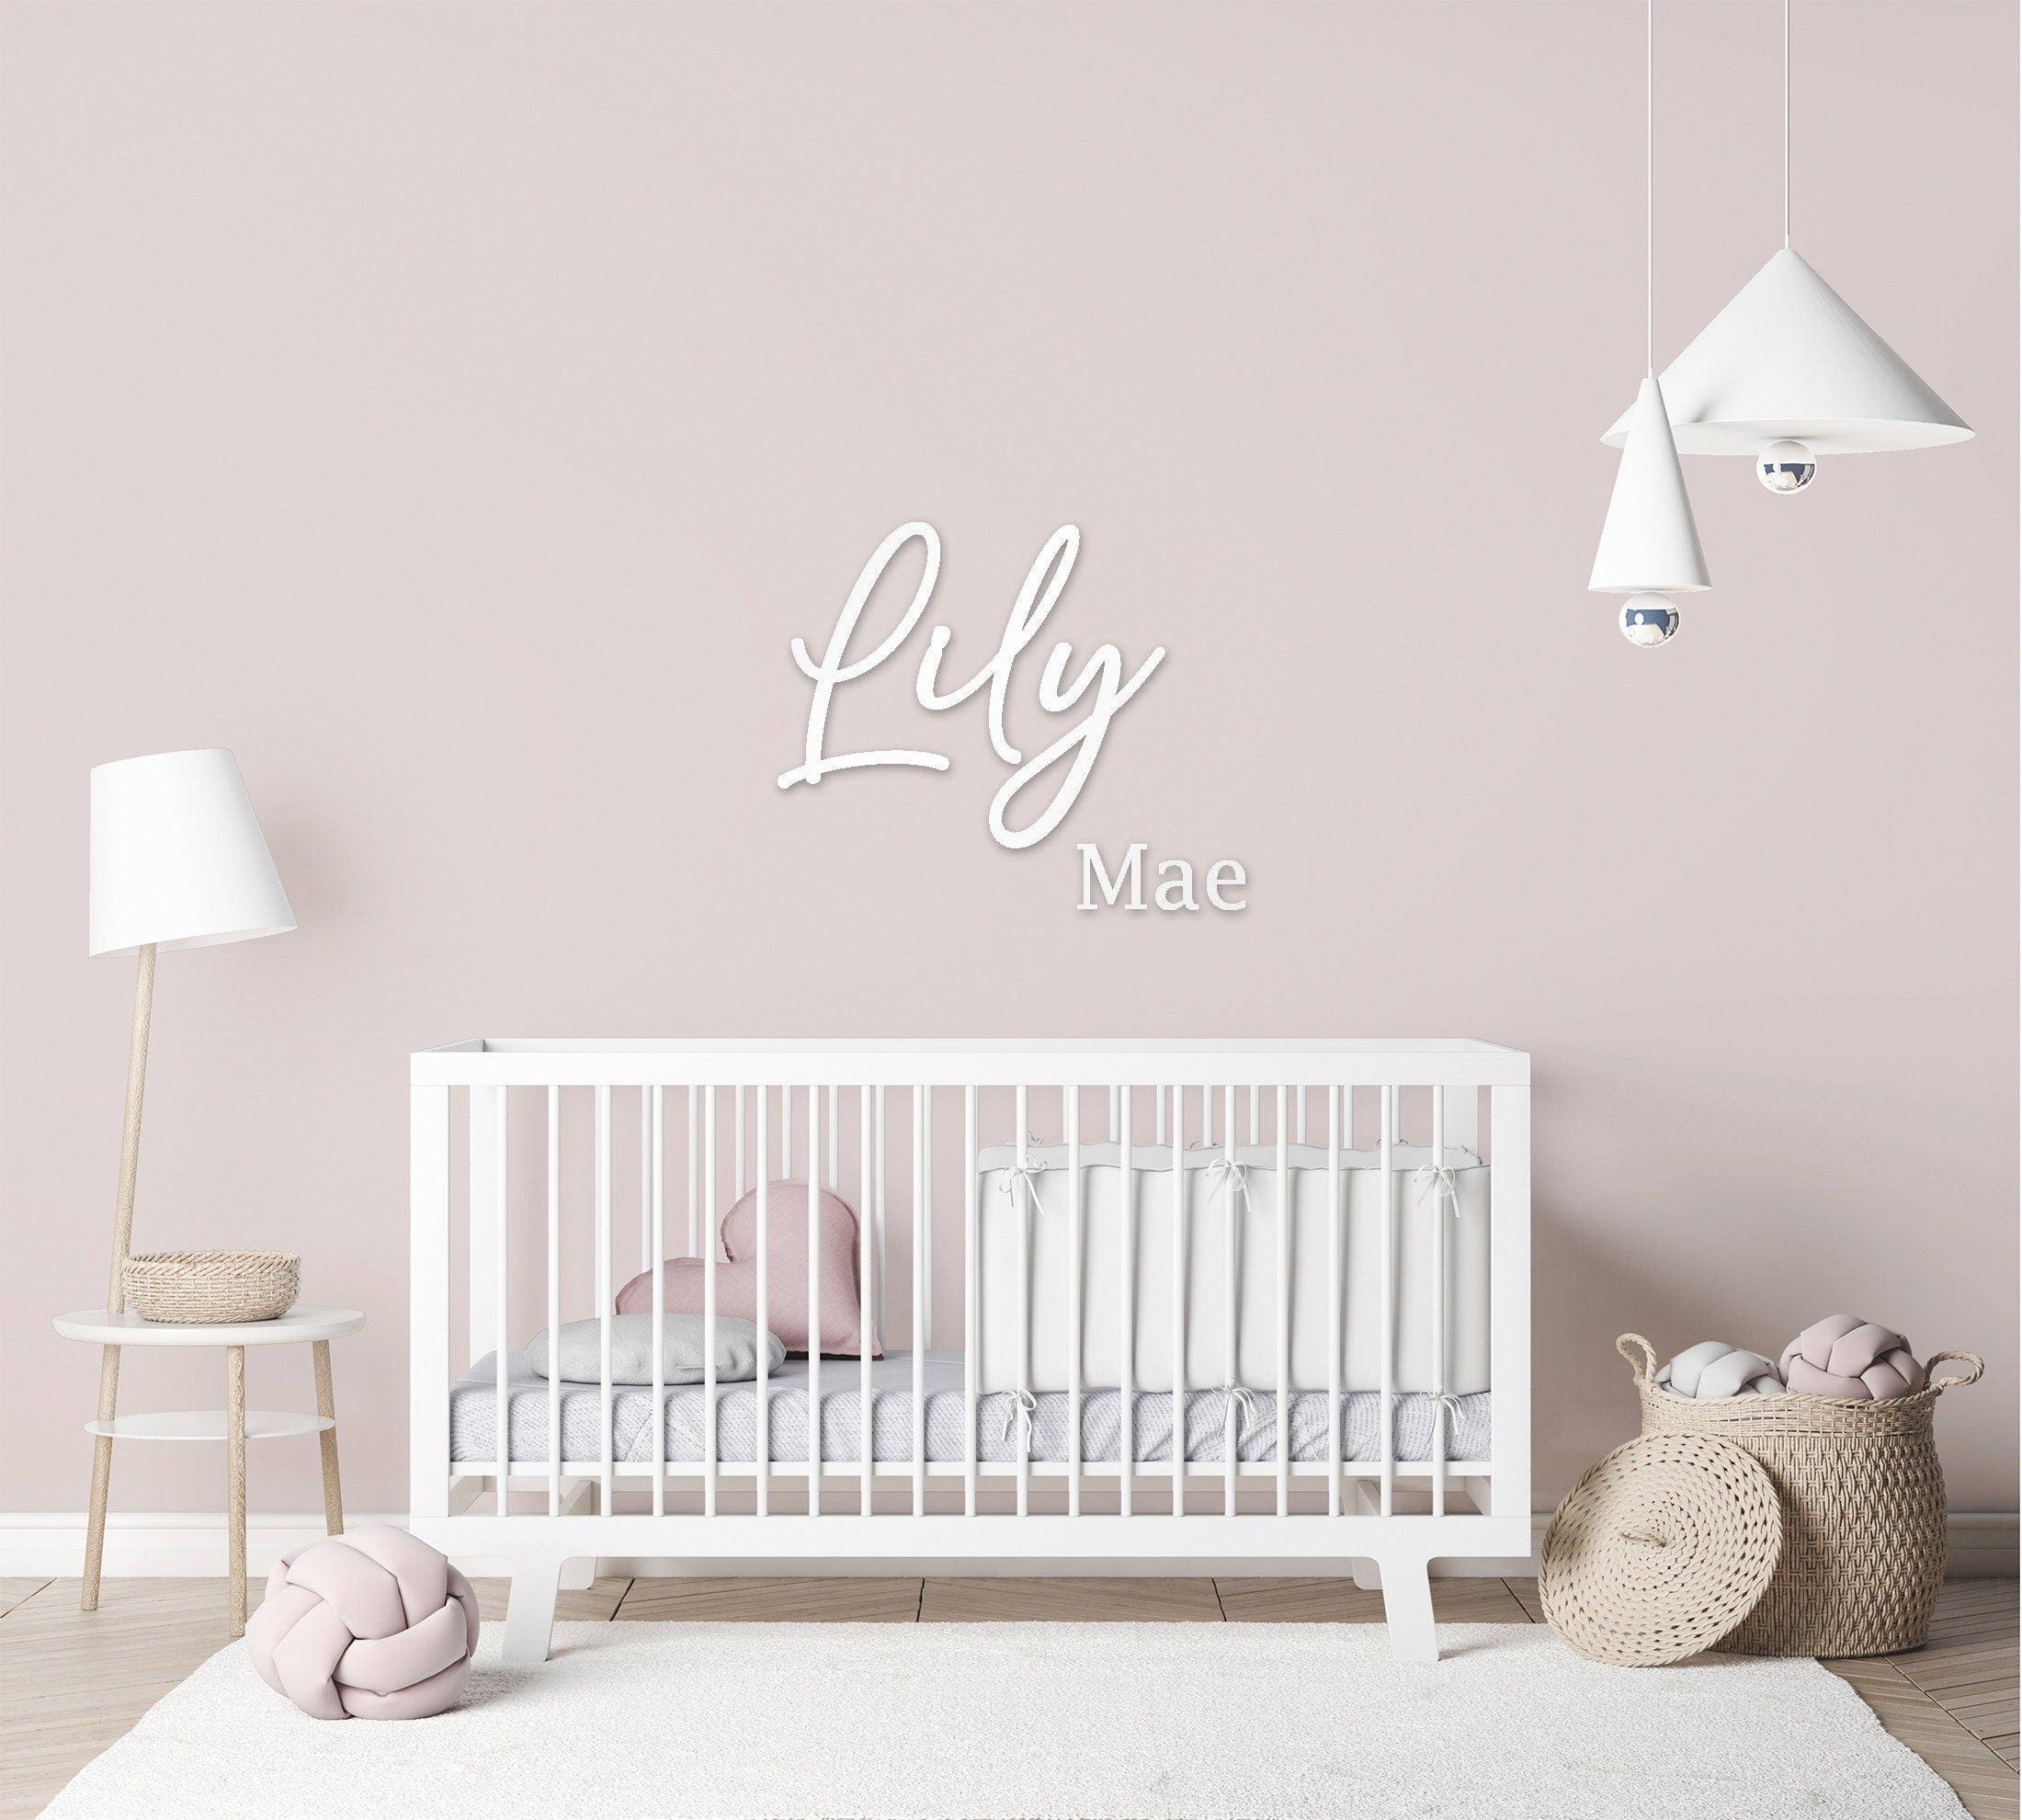 Name Wall Art - Childrens Bedroom - Wooden Word Text Art - Bedroom Art Gift - Double Line Style 4